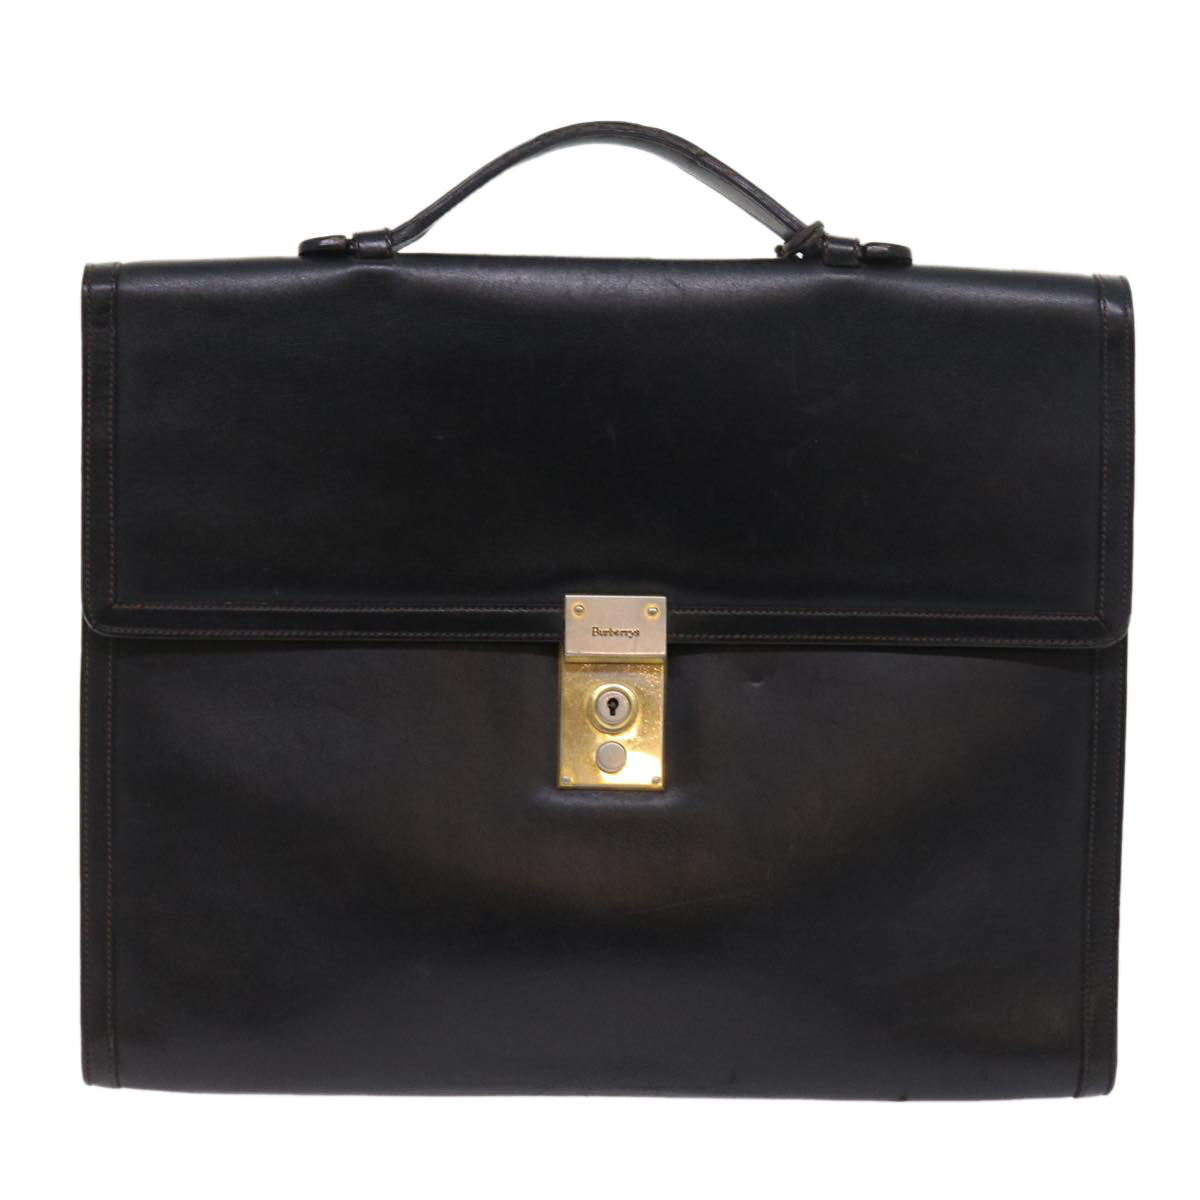 Burberrys Business Bag Leather Black Auth bs8731 - 0